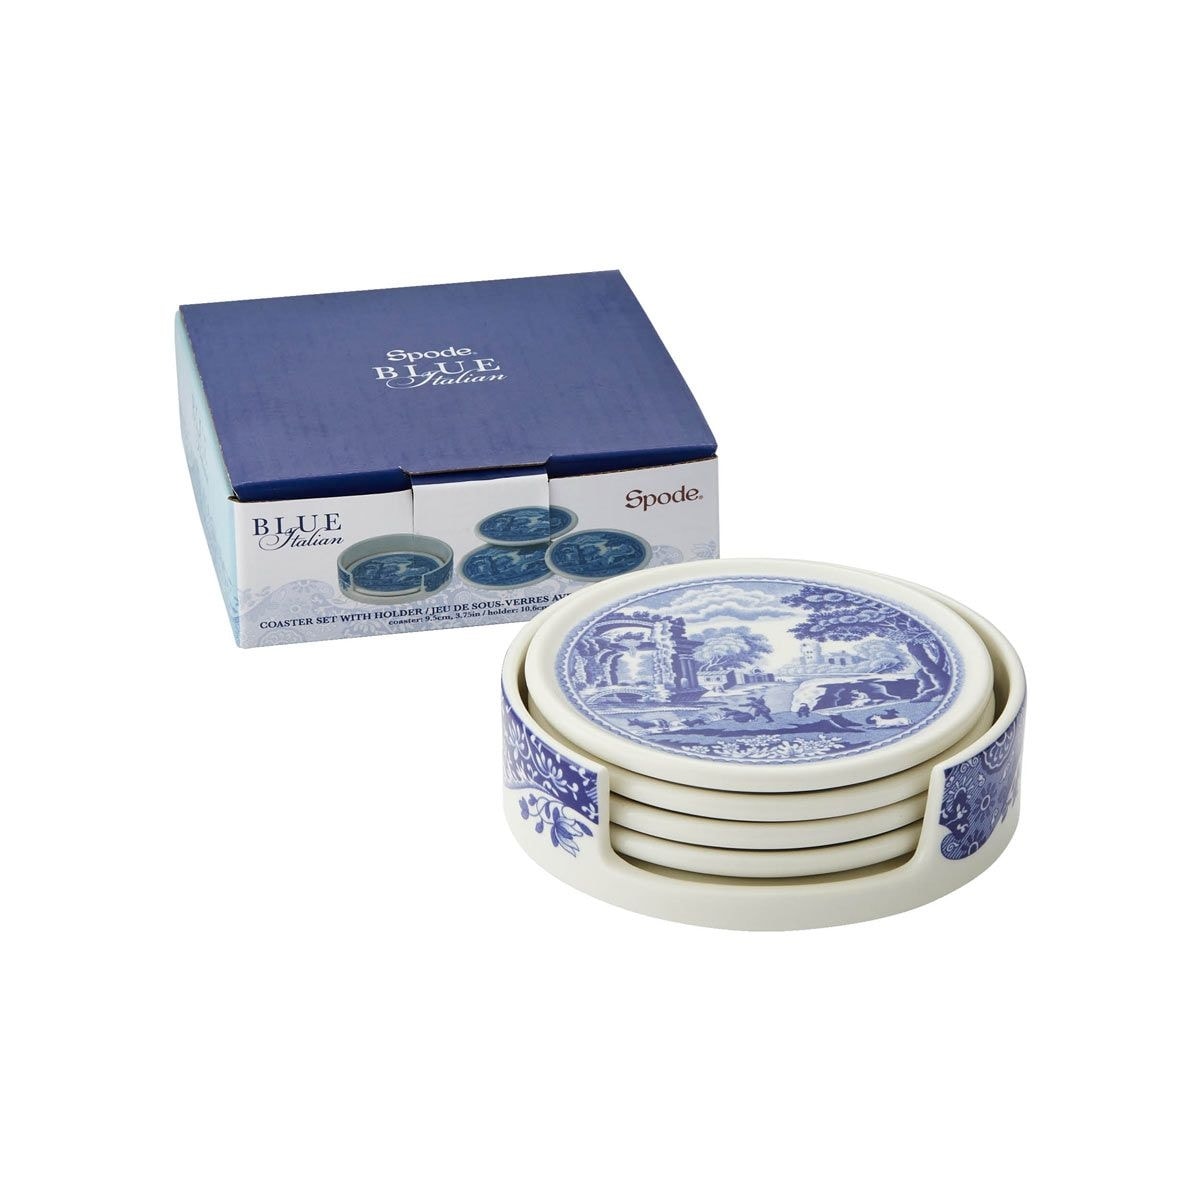 https://ak1.ostkcdn.com/images/products/is/images/direct/b7c16c3b0b43774aeef64c64fe341a448b67b1e7/Spode-Blue-Italian-4-Piece-Ceramic-Coasters-with-Holder.jpg